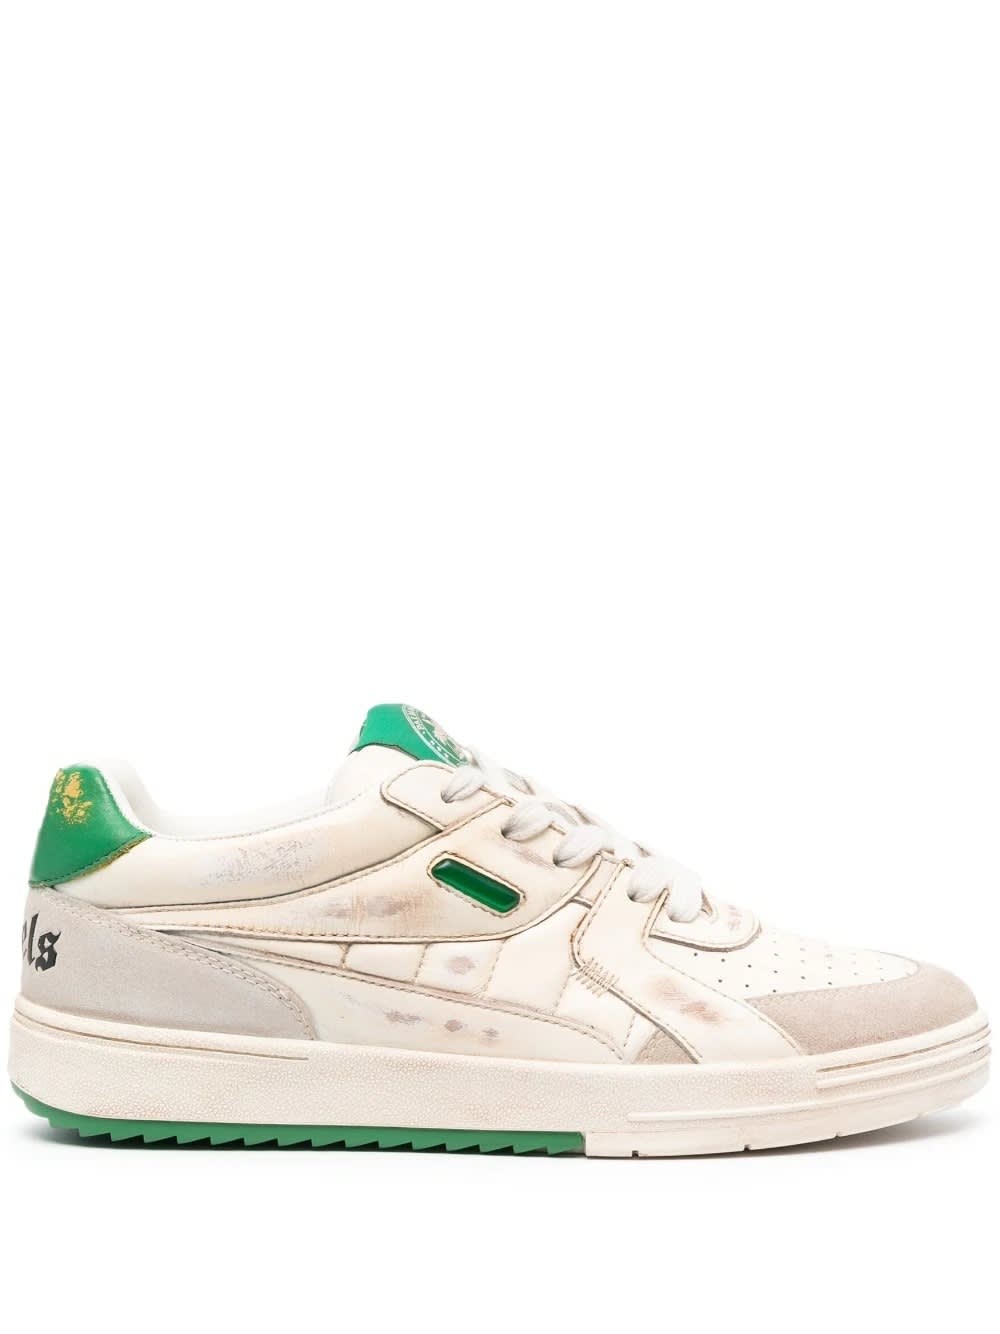 PALM ANGELS WHITE AND GREEN UNIVERSITY LOW SNEAKERS